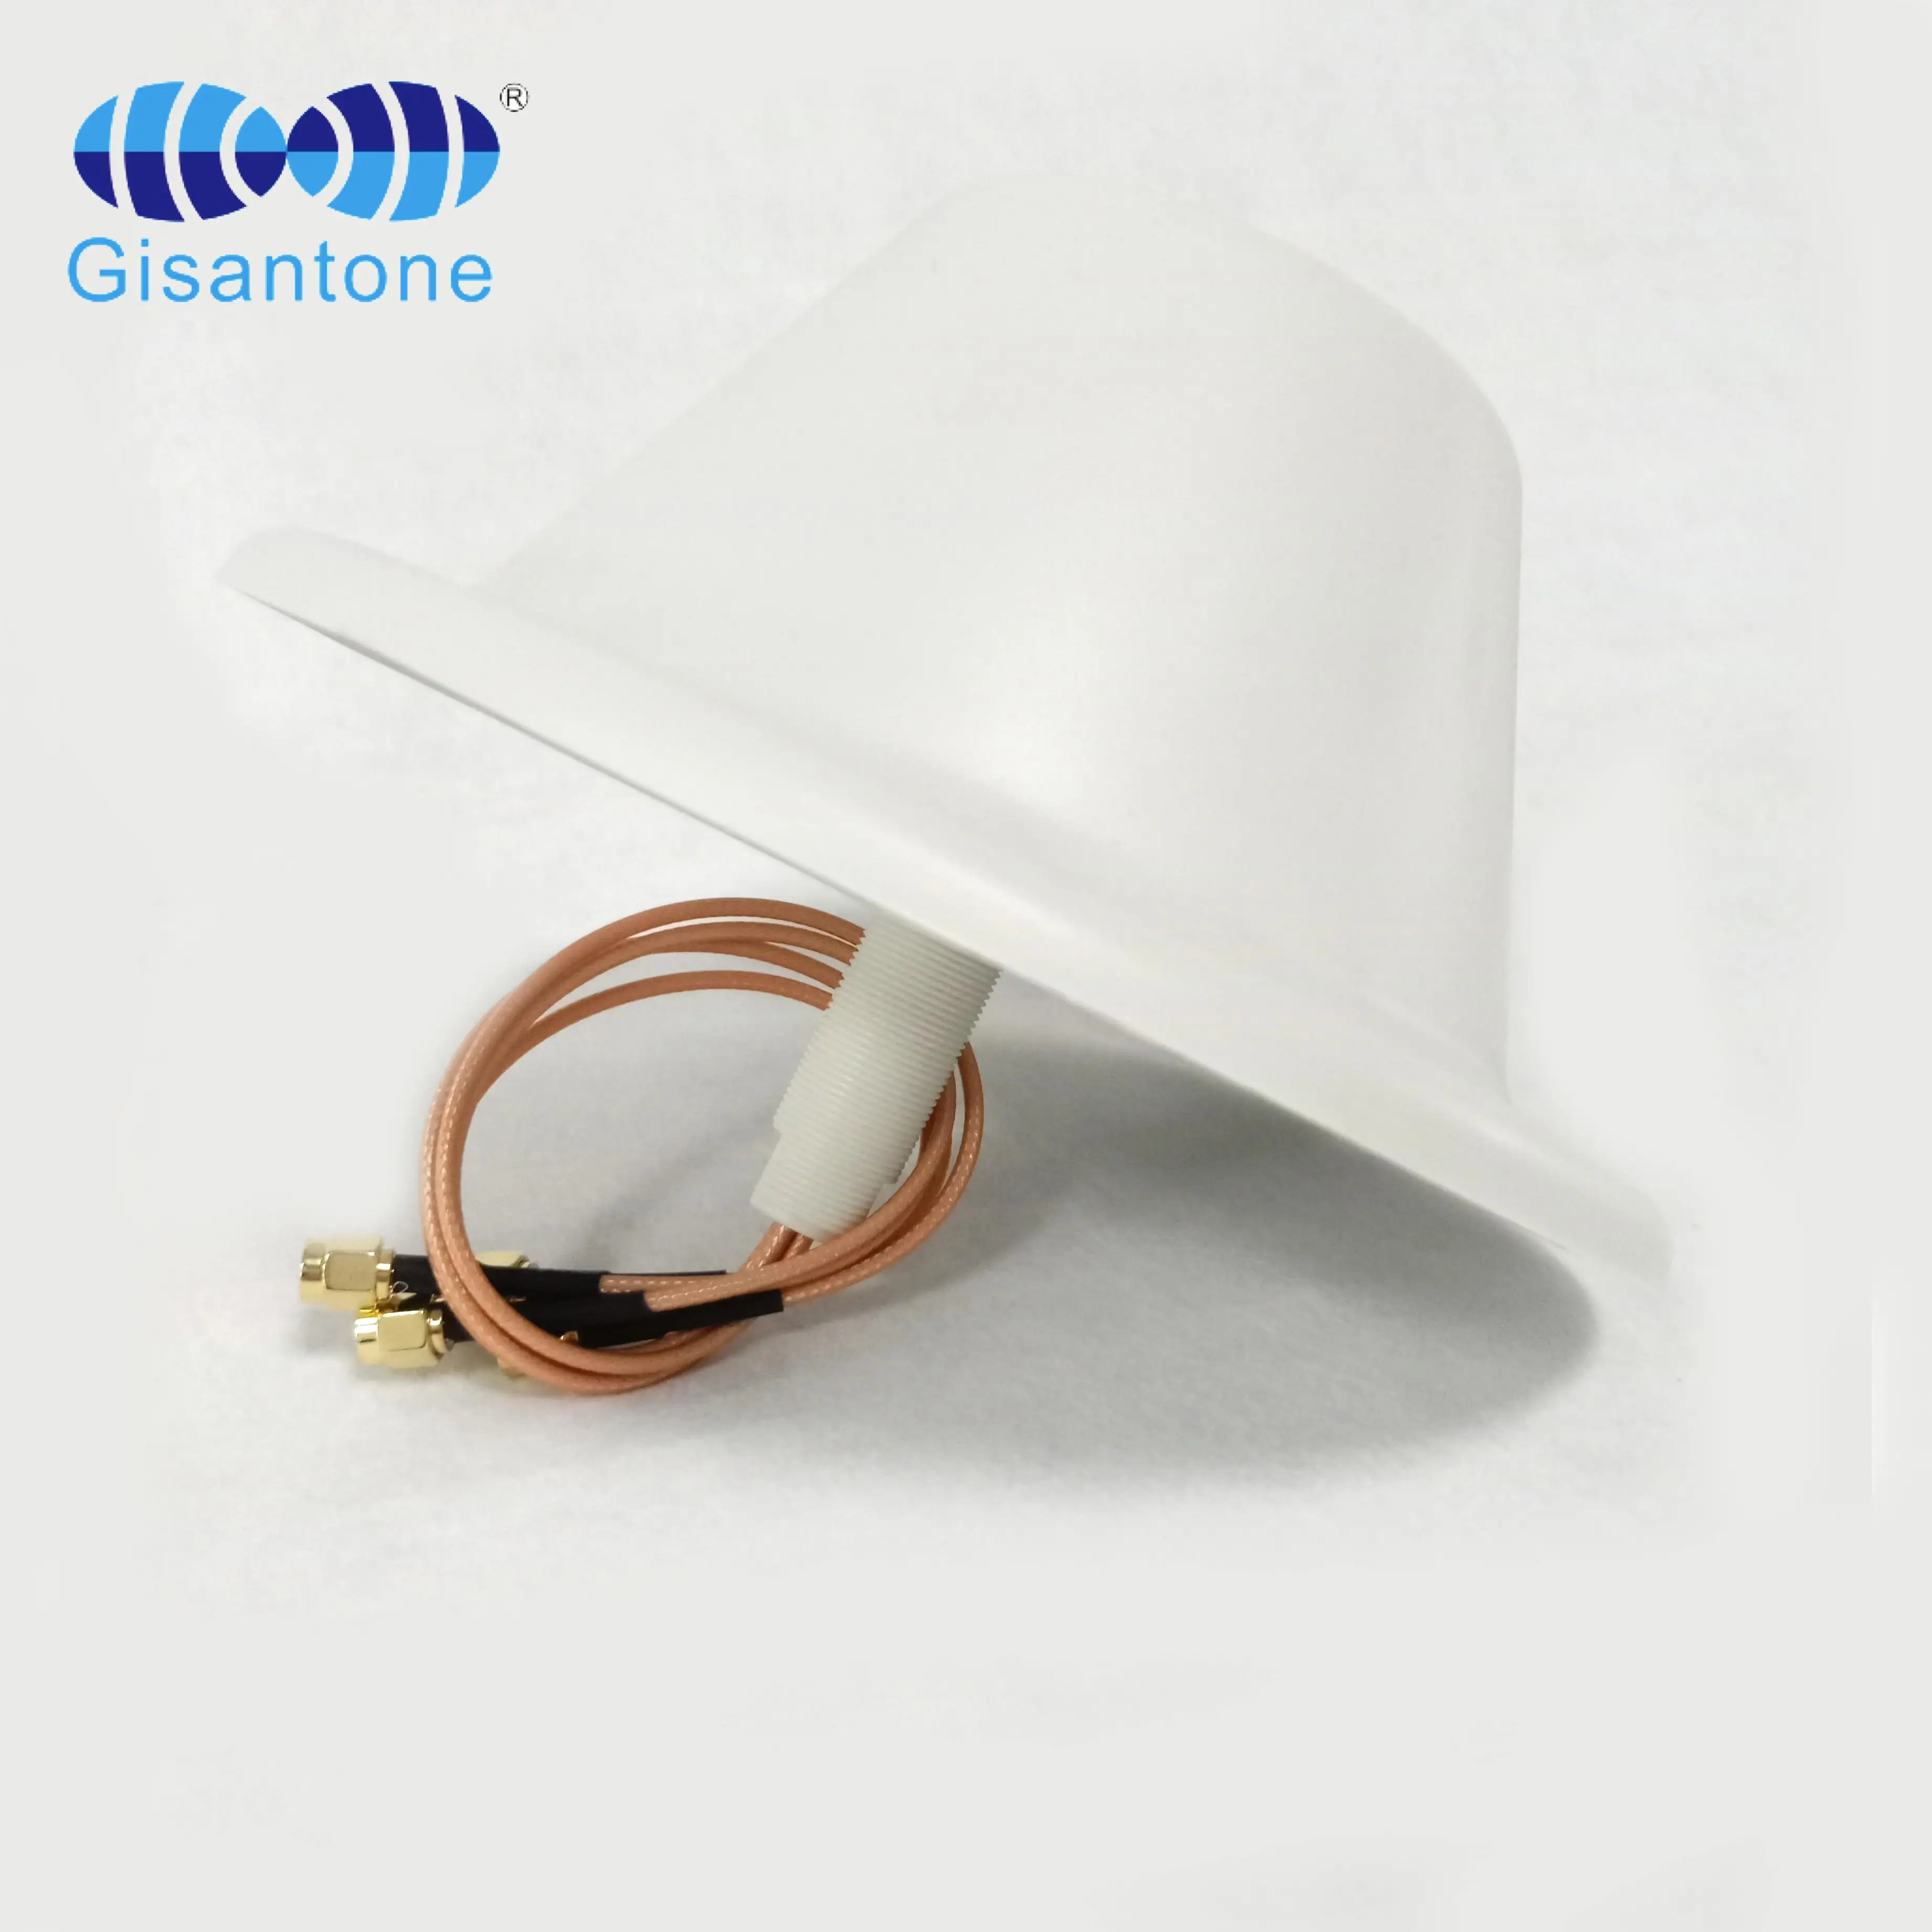 Gisantone 2.4/5.8G NEW product mimo ceiling antenna